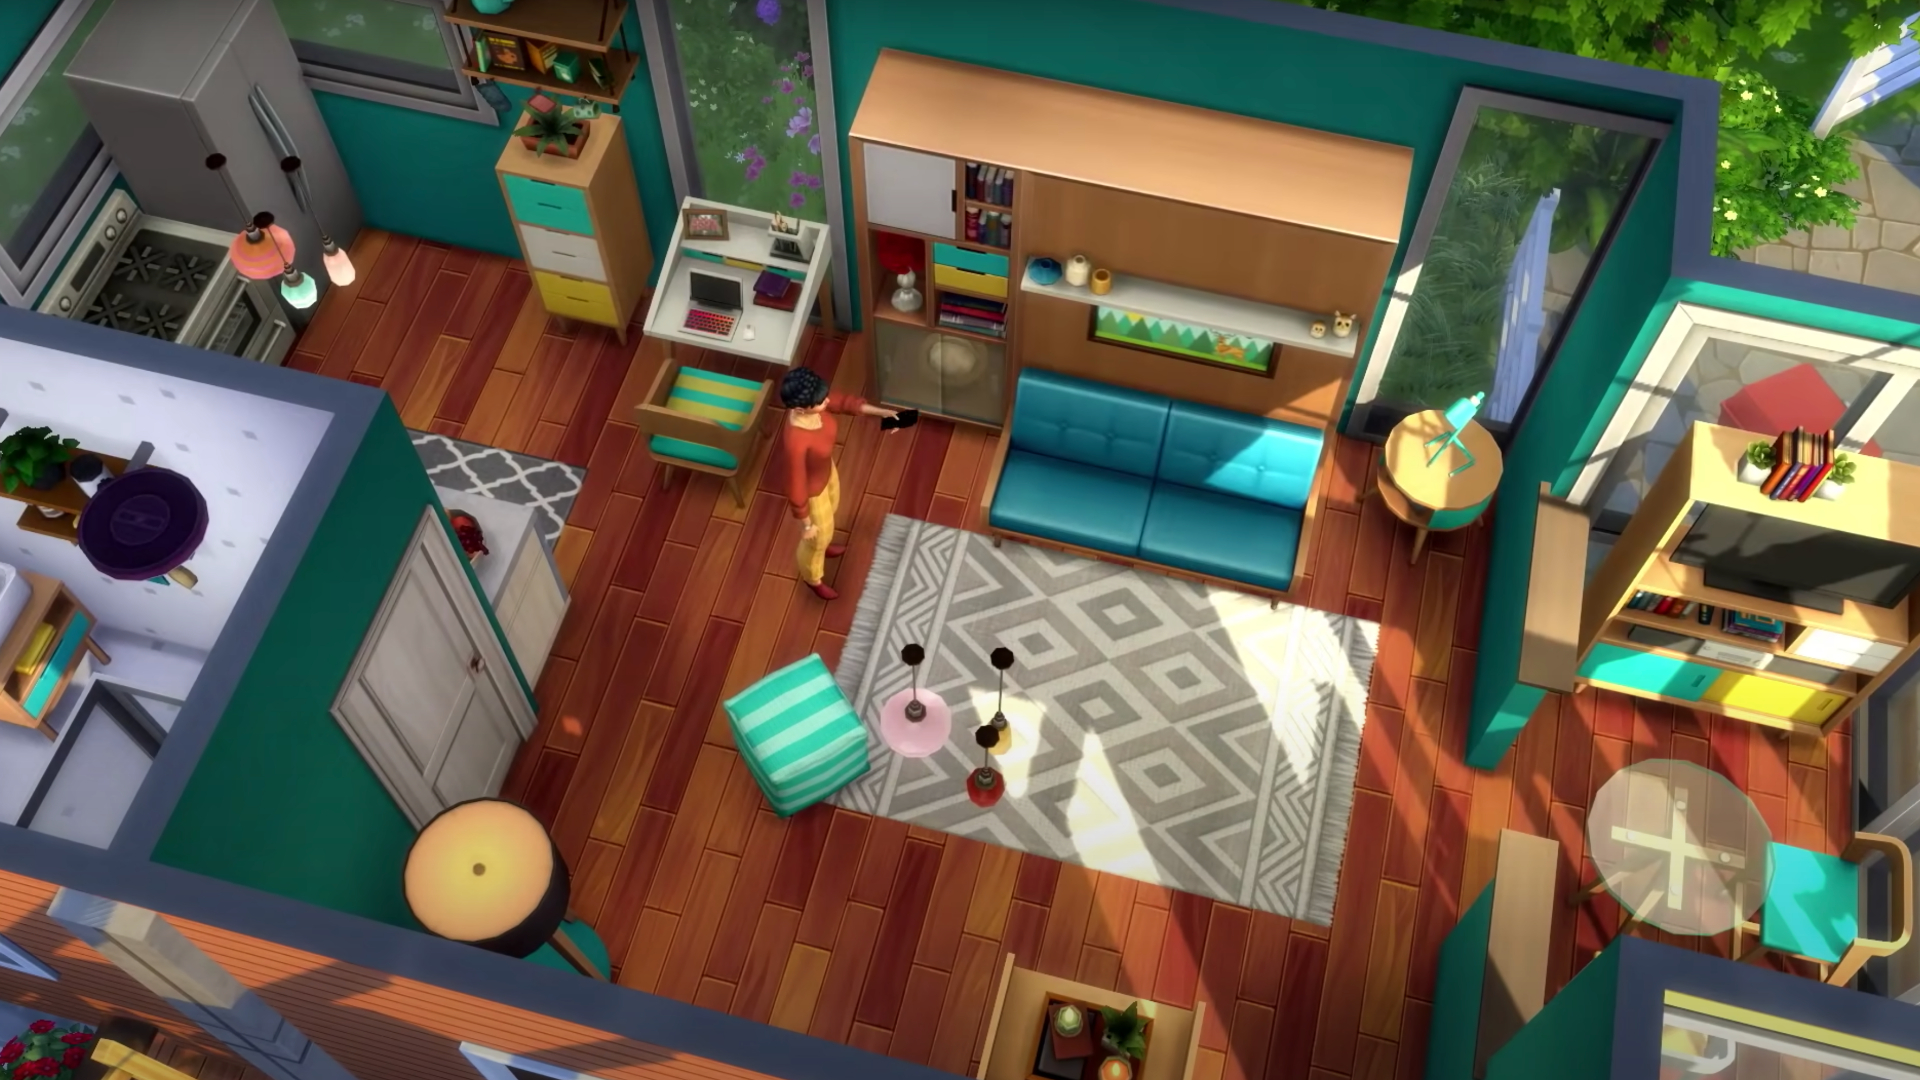 How to use The Sims 4 debug cheat to unlock more objects